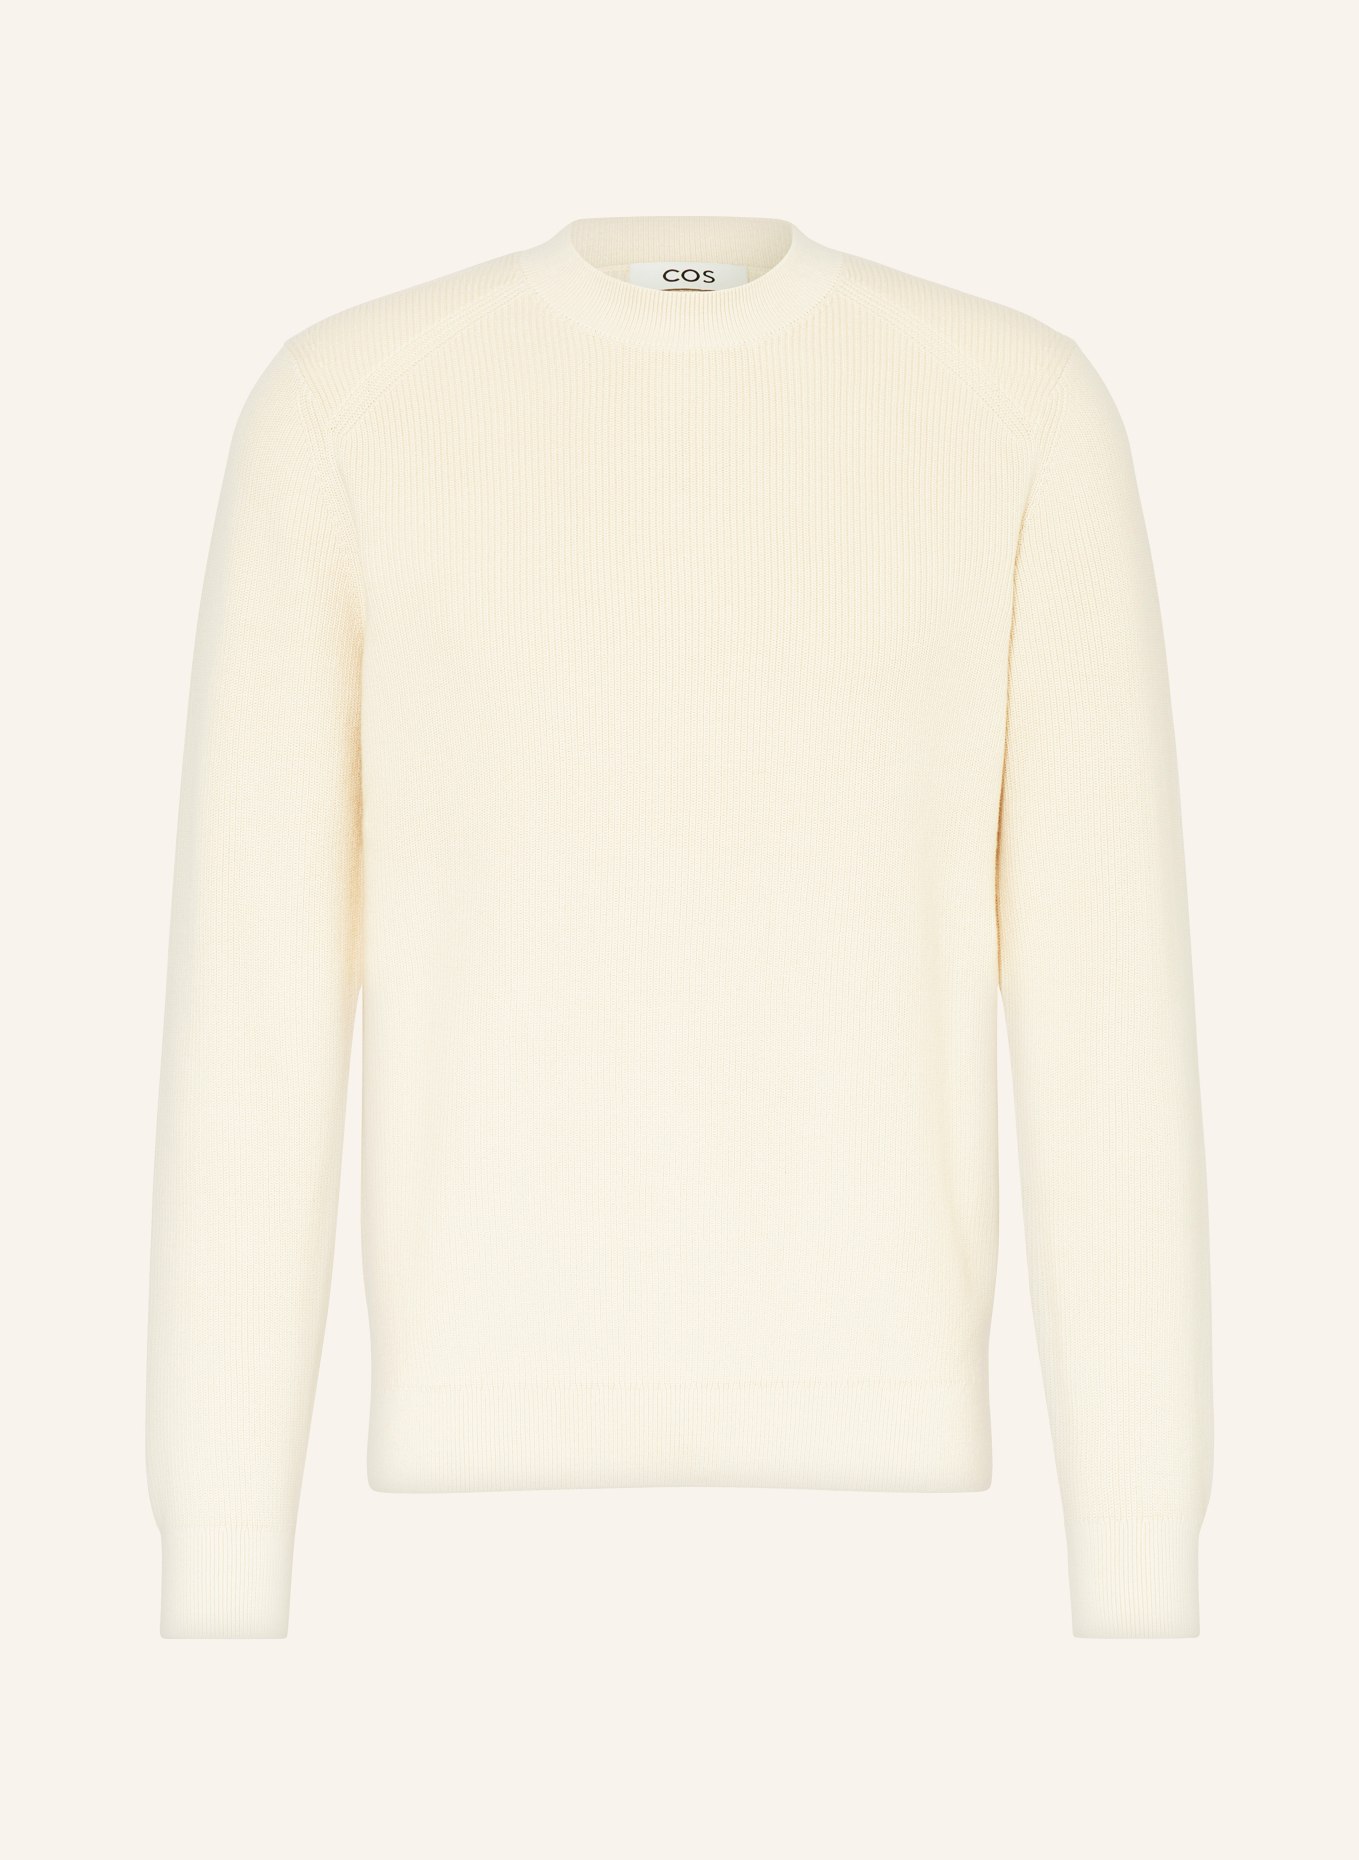 COS Sweater, Color: WHITE (Image 1)